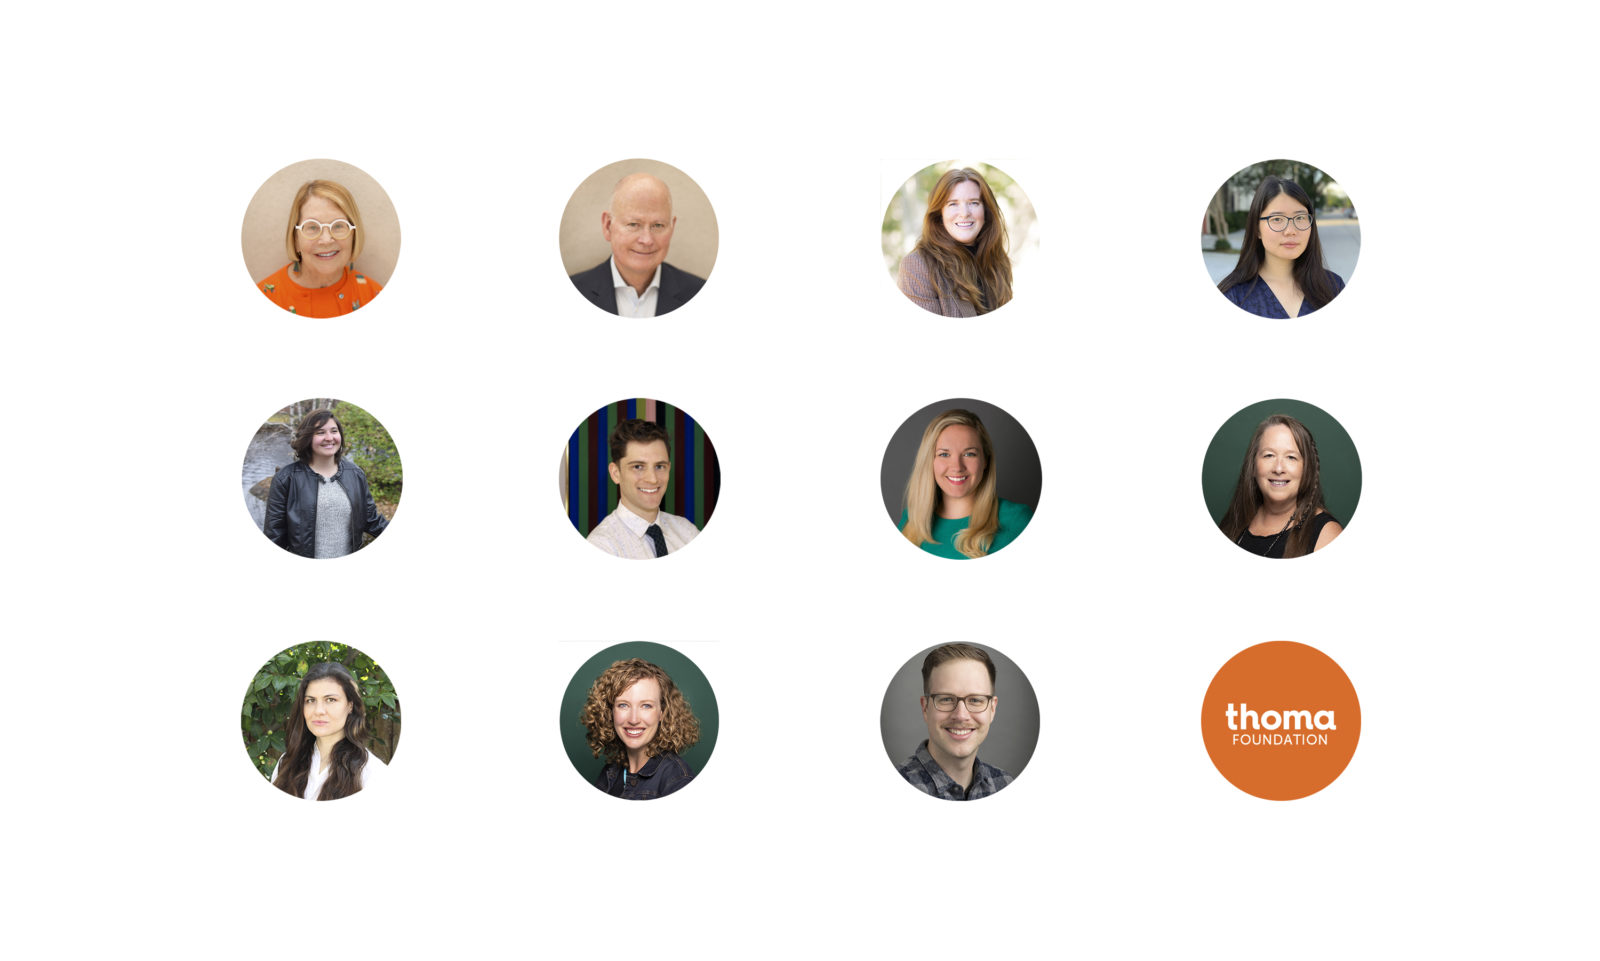 A group of headshots depicting all the team members at the Thoma Foundation.